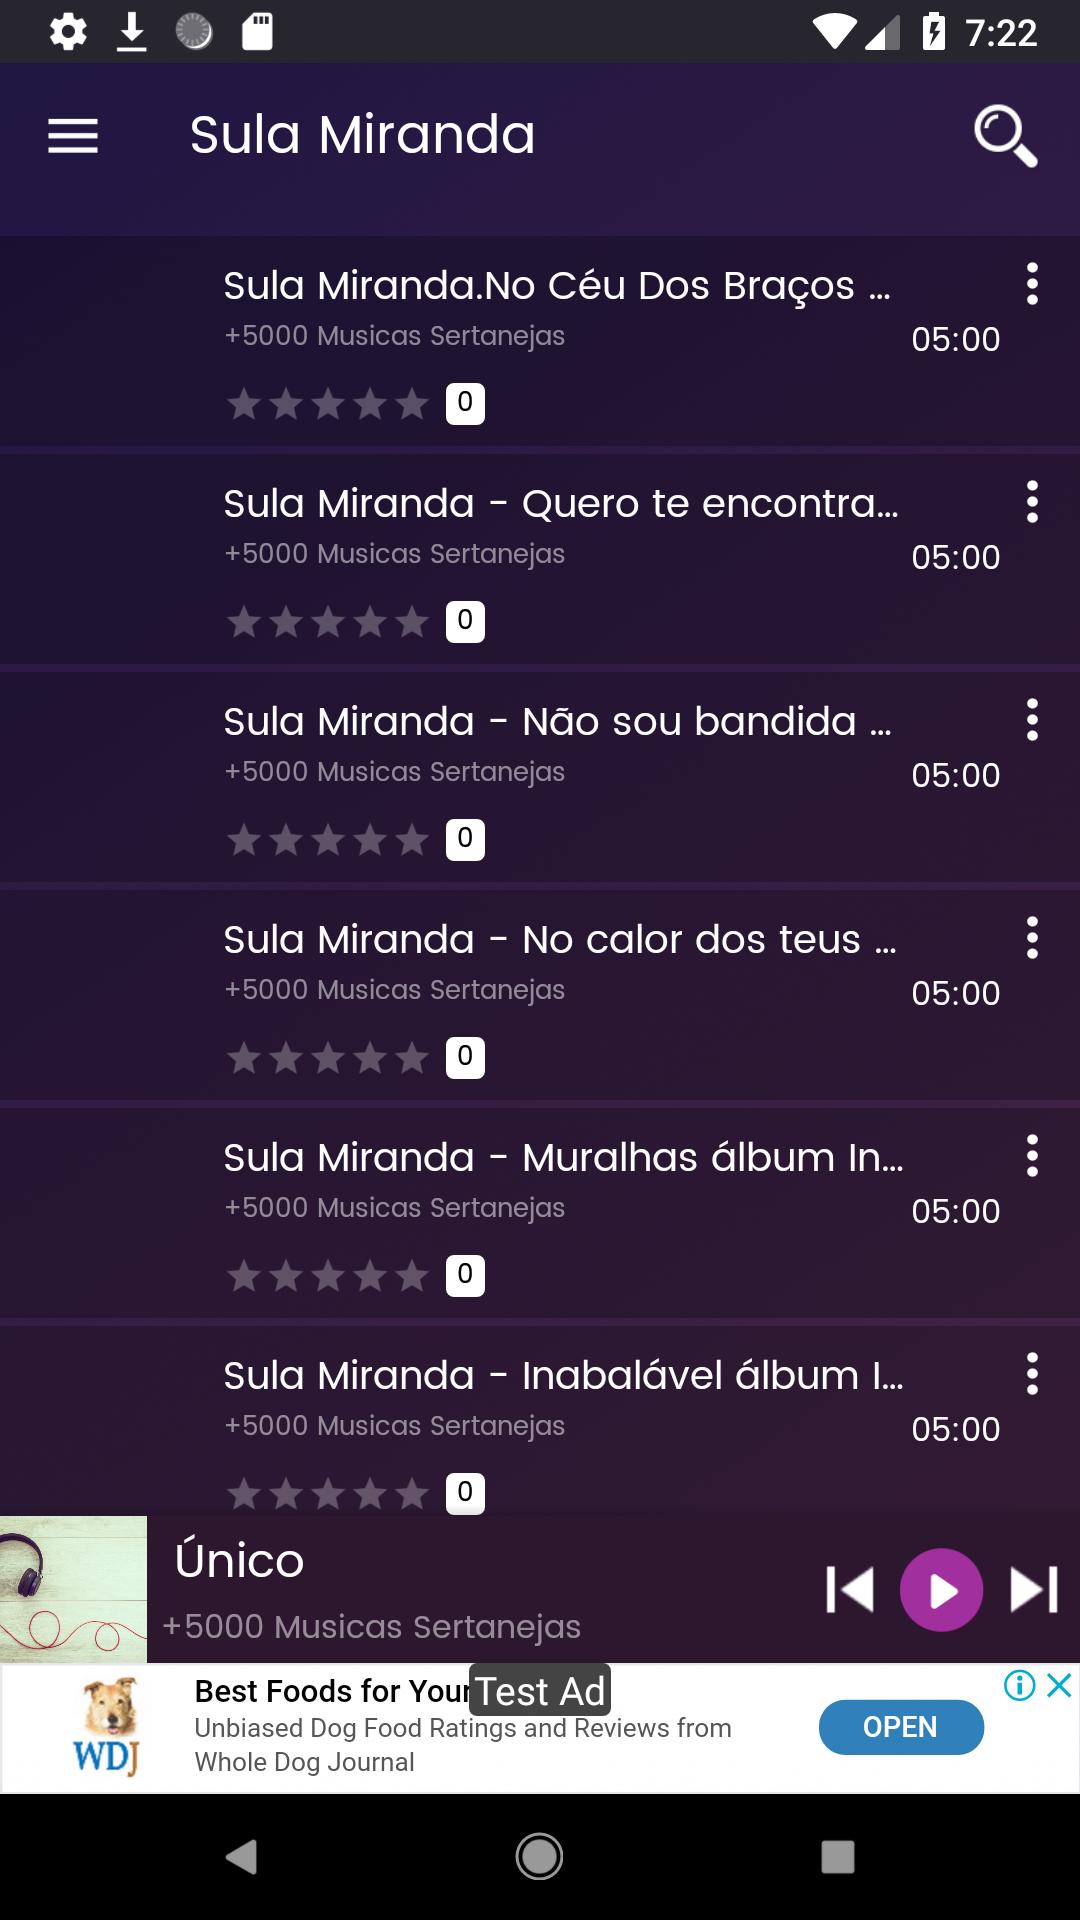 So Modao Top - Sertanejo Brasil 2018 for Android - APK Download